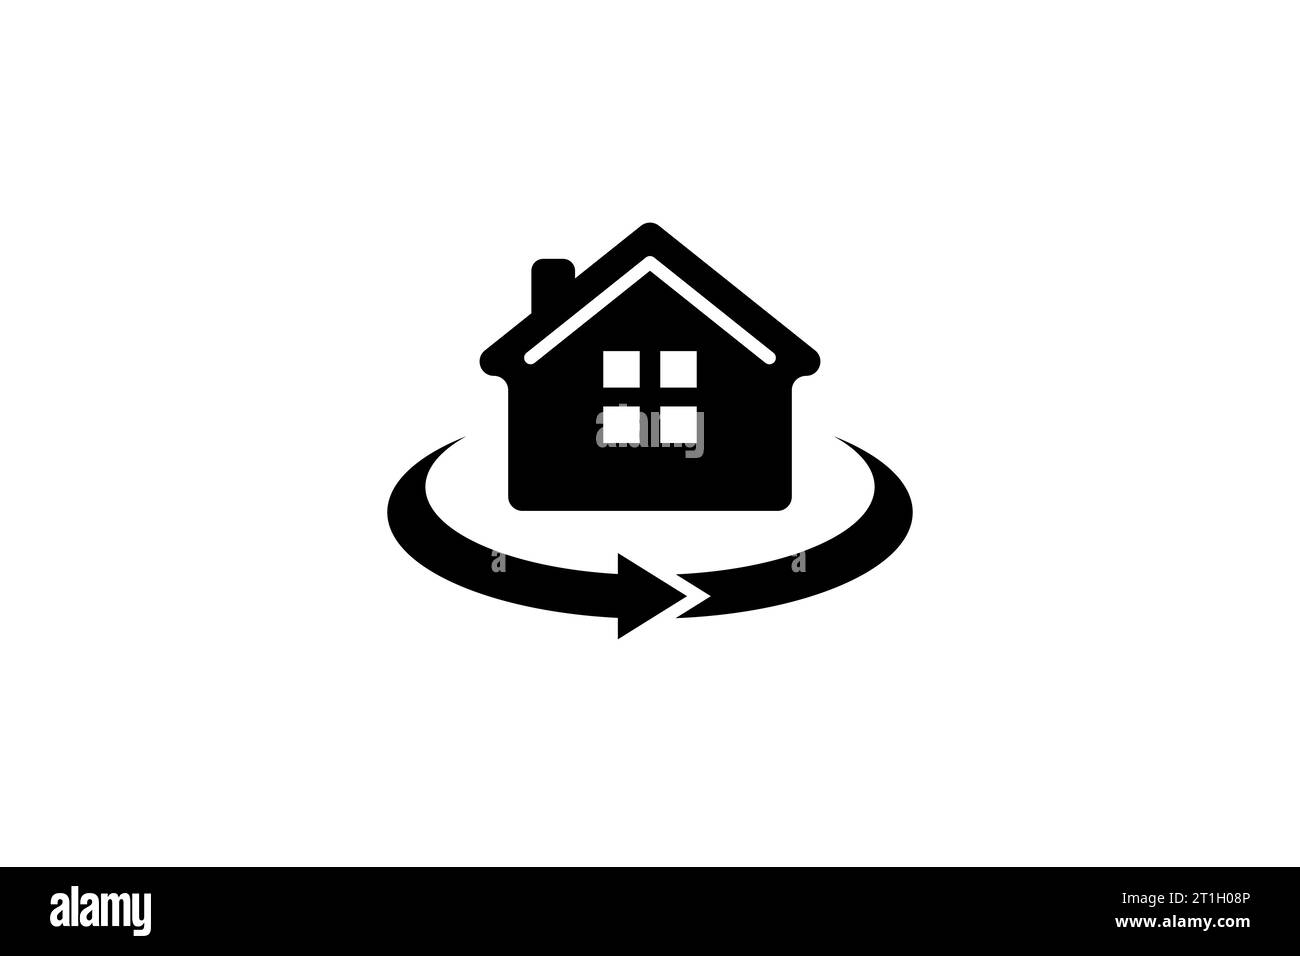 House with rotation arrow icon symbol design. 360 degree full view concept design Stock Vector